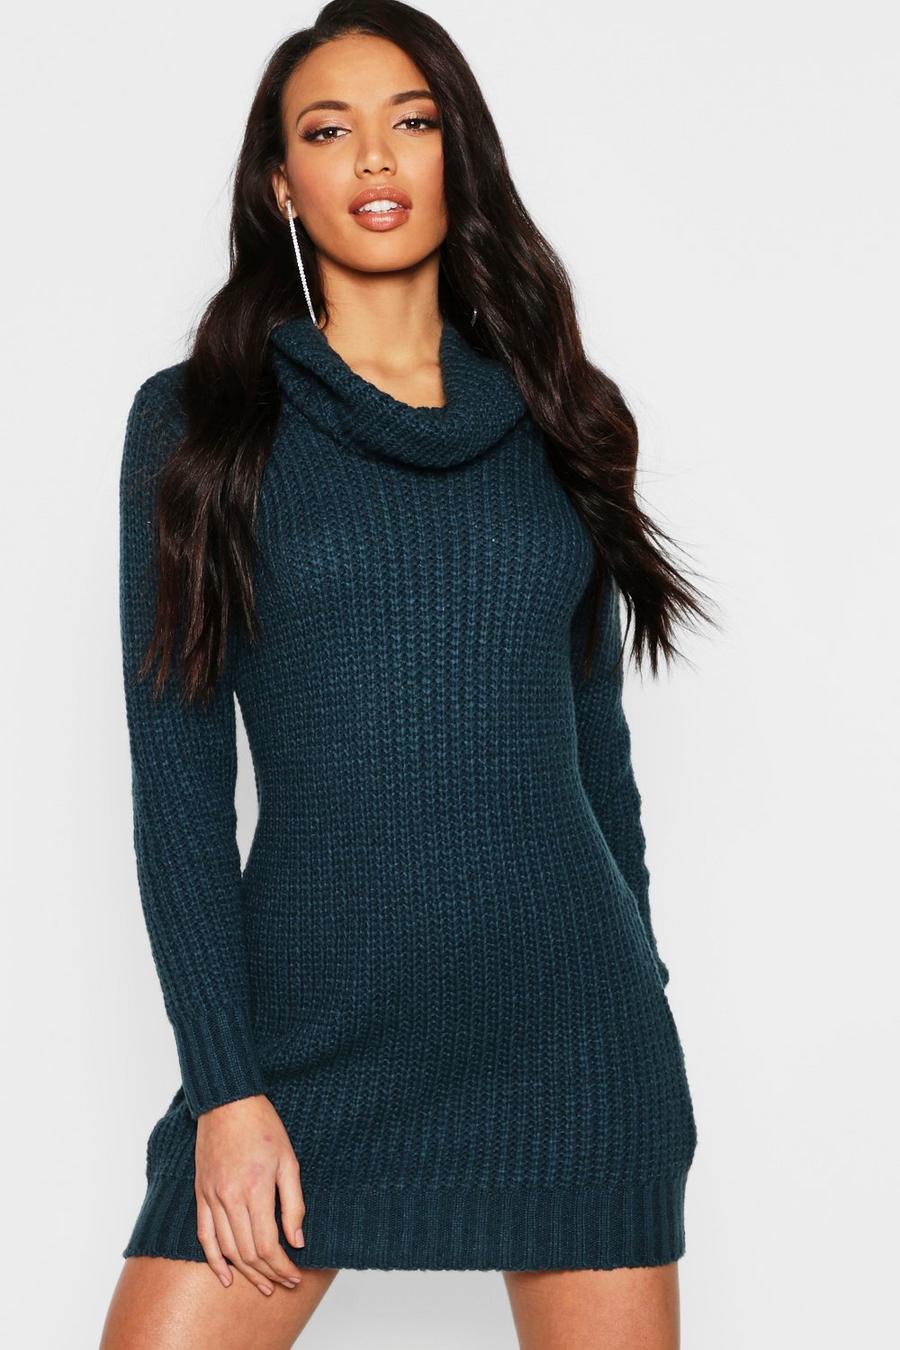 Teal Oversized Soft Knit Cowl Neck Sweater Dress image number 1